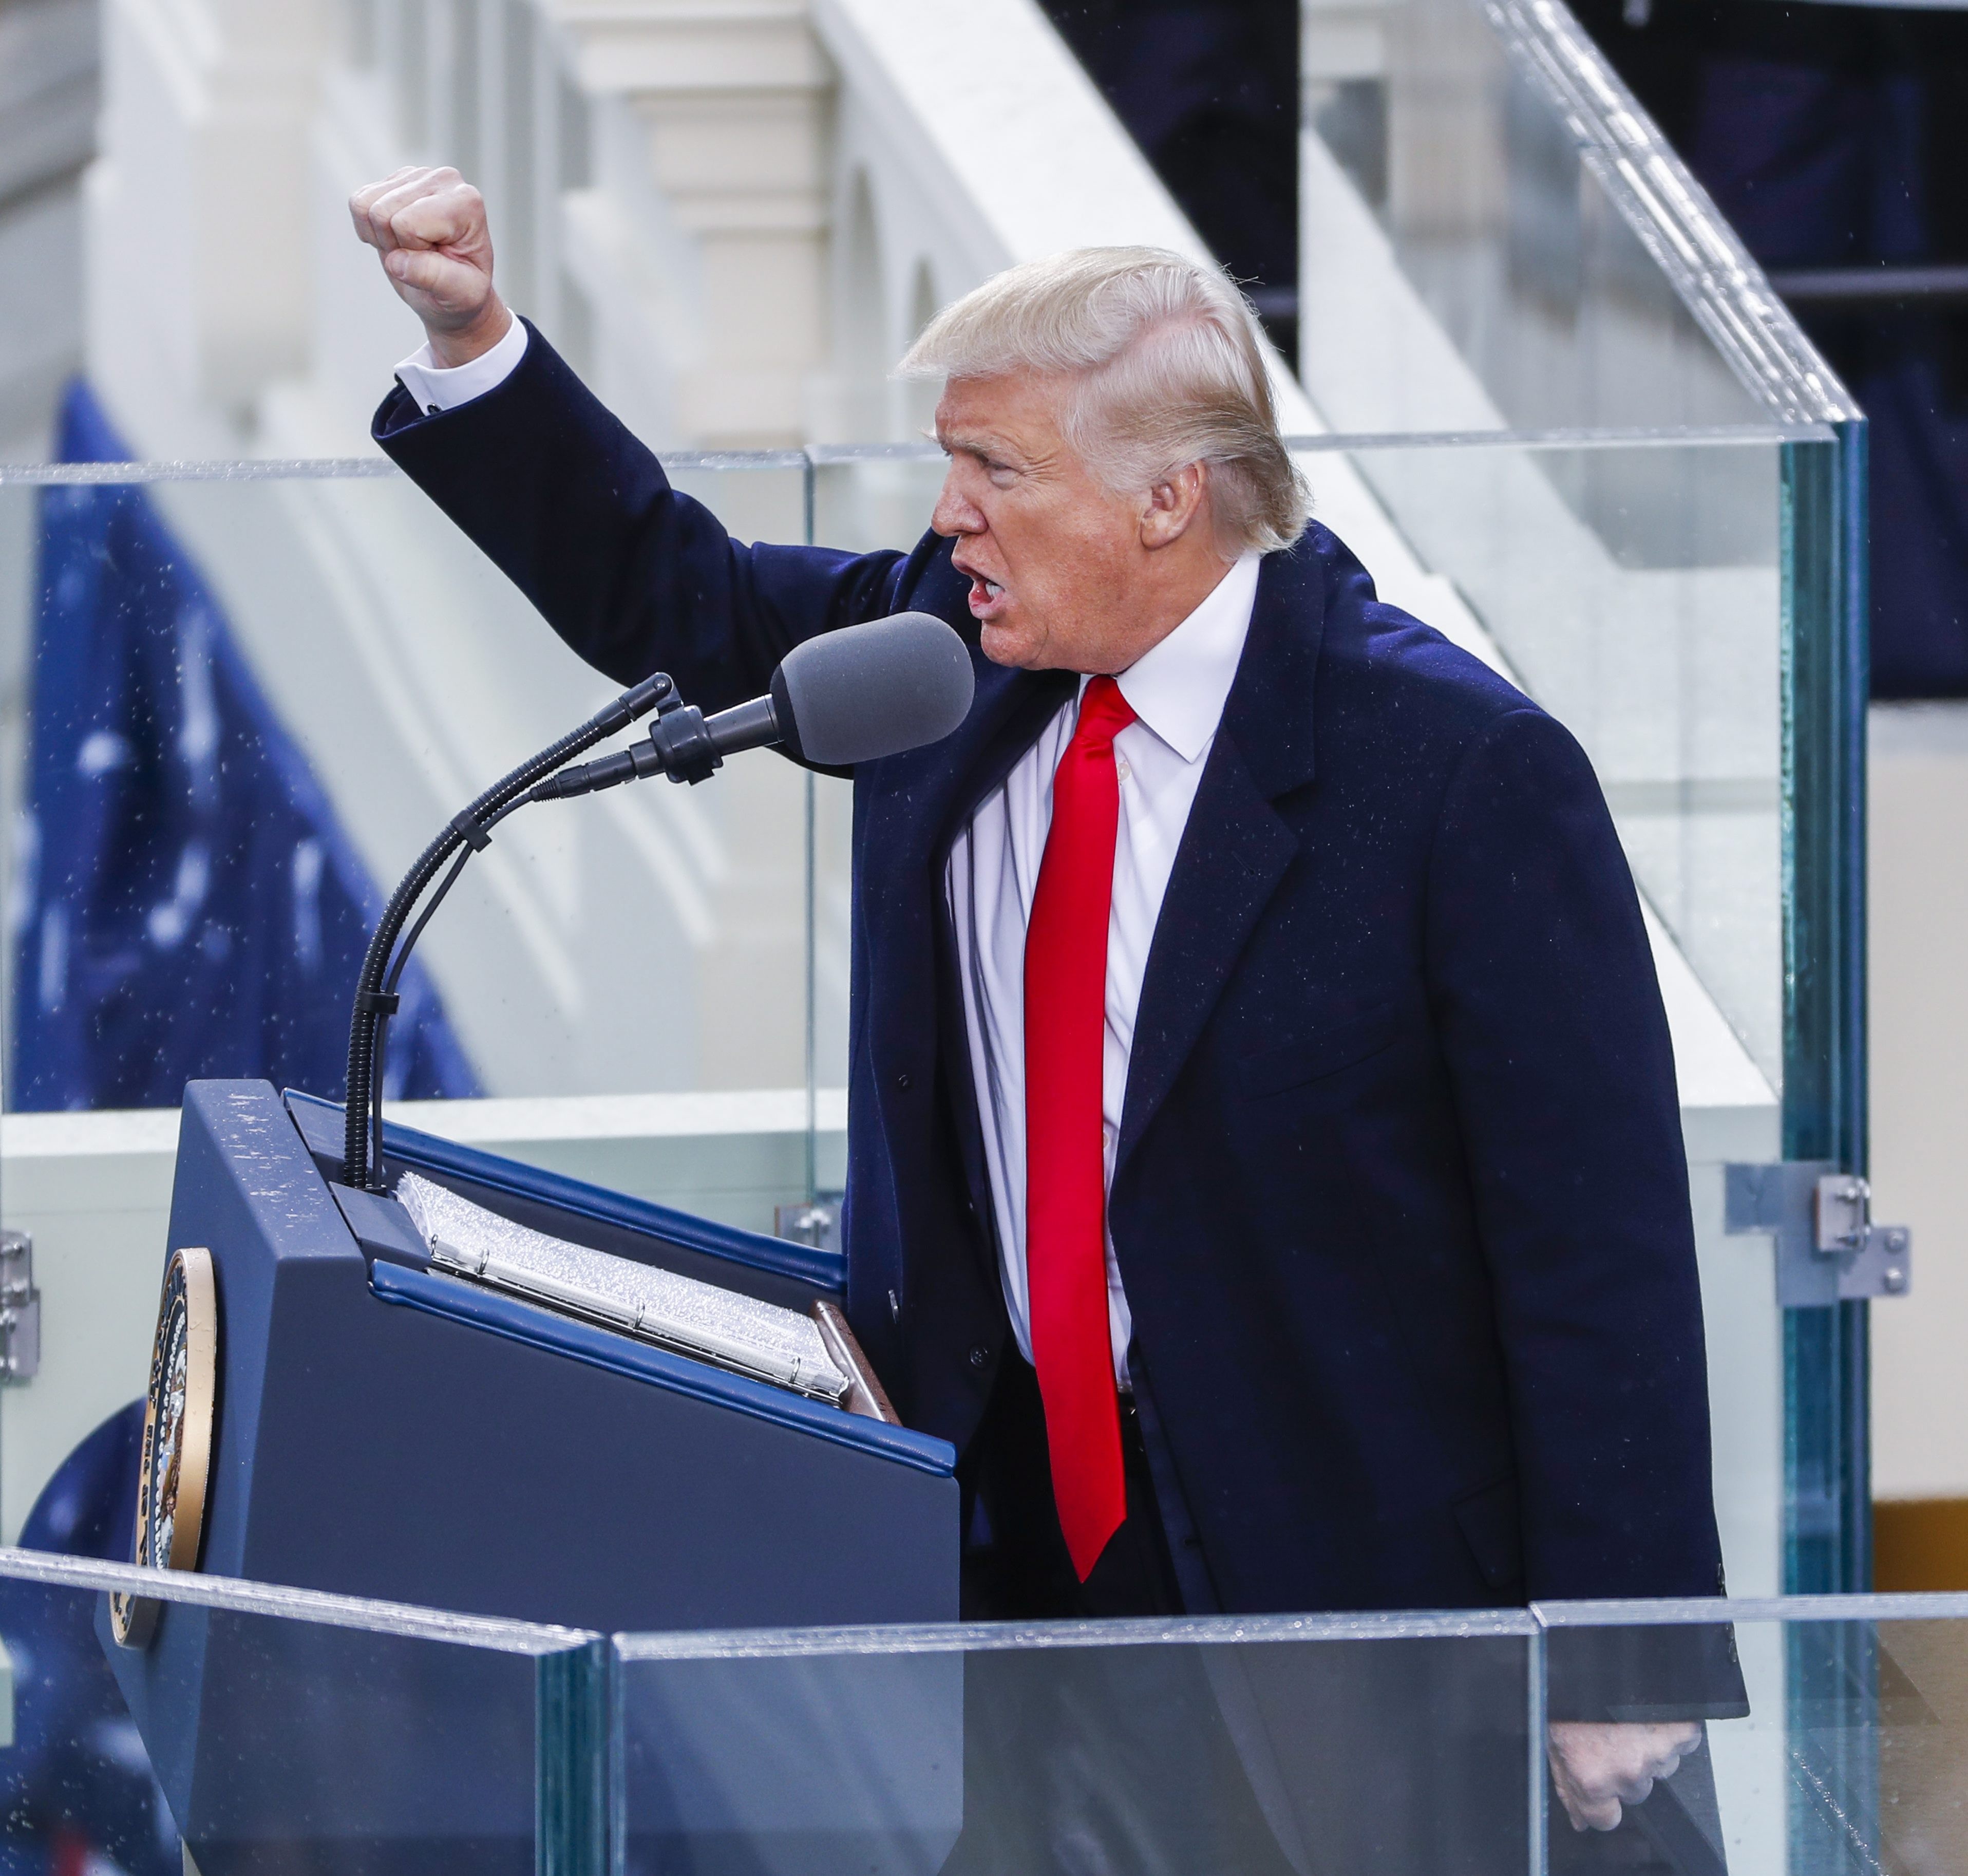 President Donald Trump delivers his inaugural address after taking the oath of office as the 45th president of the United States, on January 20 last year. Photo: EPA